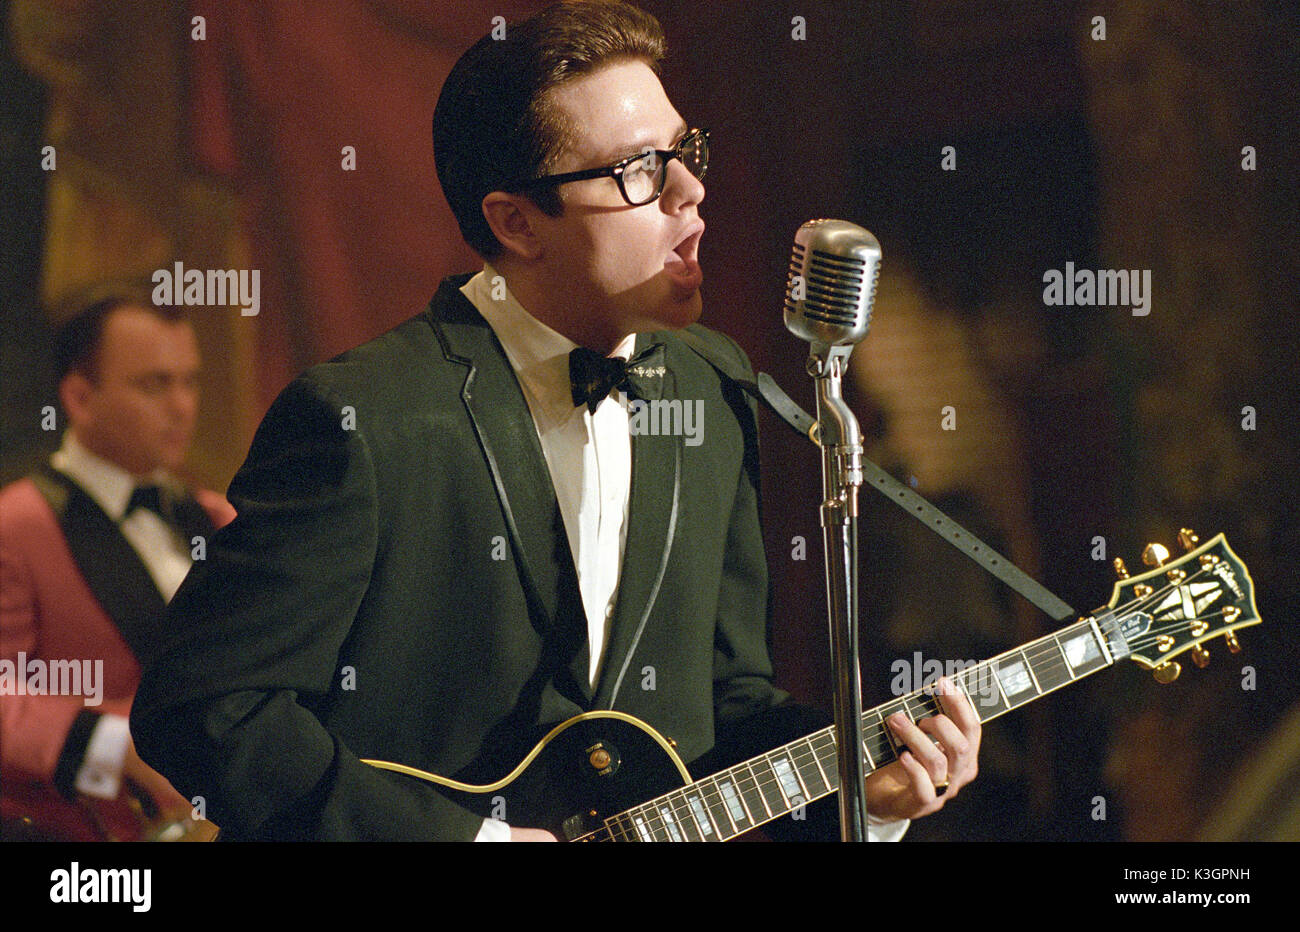 WTL-481 Jonathan Rice portrays musician Roy Orbison in WALK THE LINE. Photo credit: Suzanne Tenner TM and &#xa9; 2005 Twentieth Century Fox. All Rights Reserved. Not for sale or duplication. WALK THE LINE JONATHAN RICE as ROY ORBISON WTL-481 Jonathan Rice portrays musician Roy Orbison in WALK THE LINE. Photo credit: Suzanne Tenner TM and  2005 Twentieth Century Fox. All Rights Reserved. Not for sale or duplication.     Date: 2005 Stock Photo